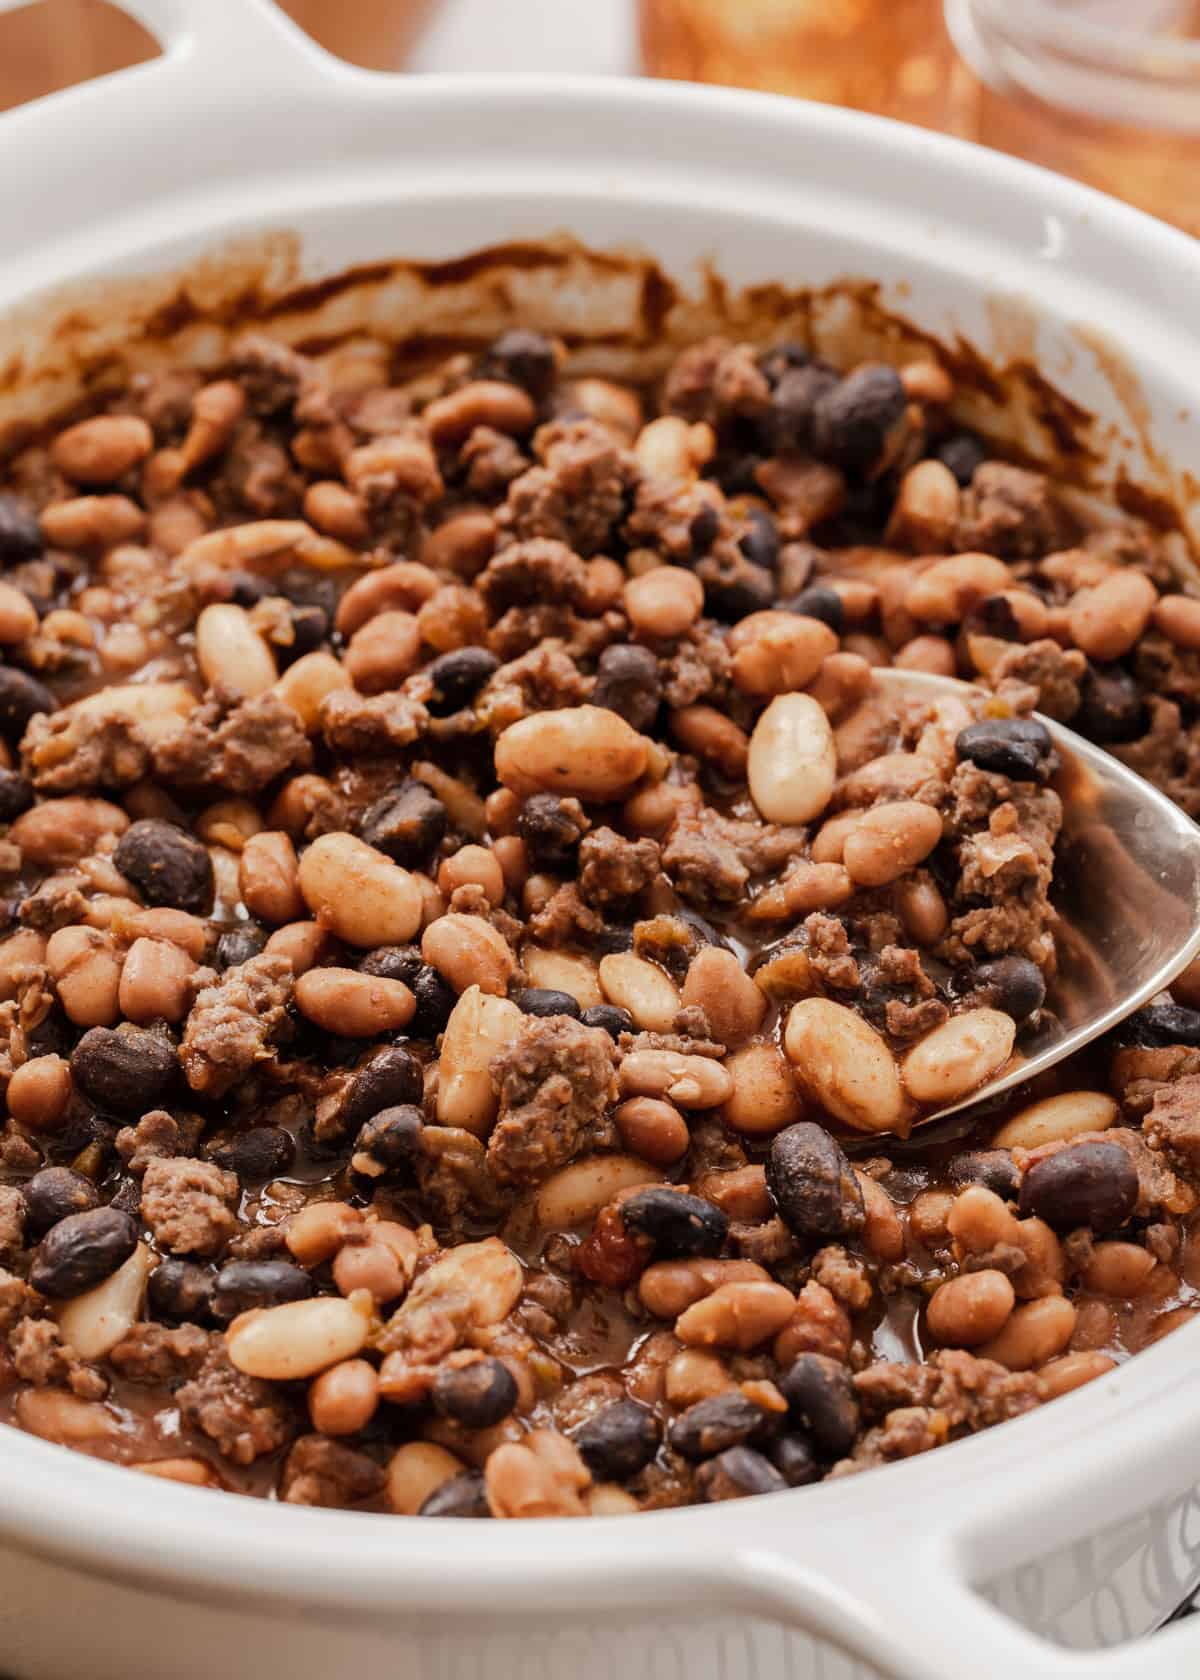 round white baking dish with baked beans and ground beef, with serving spoon.